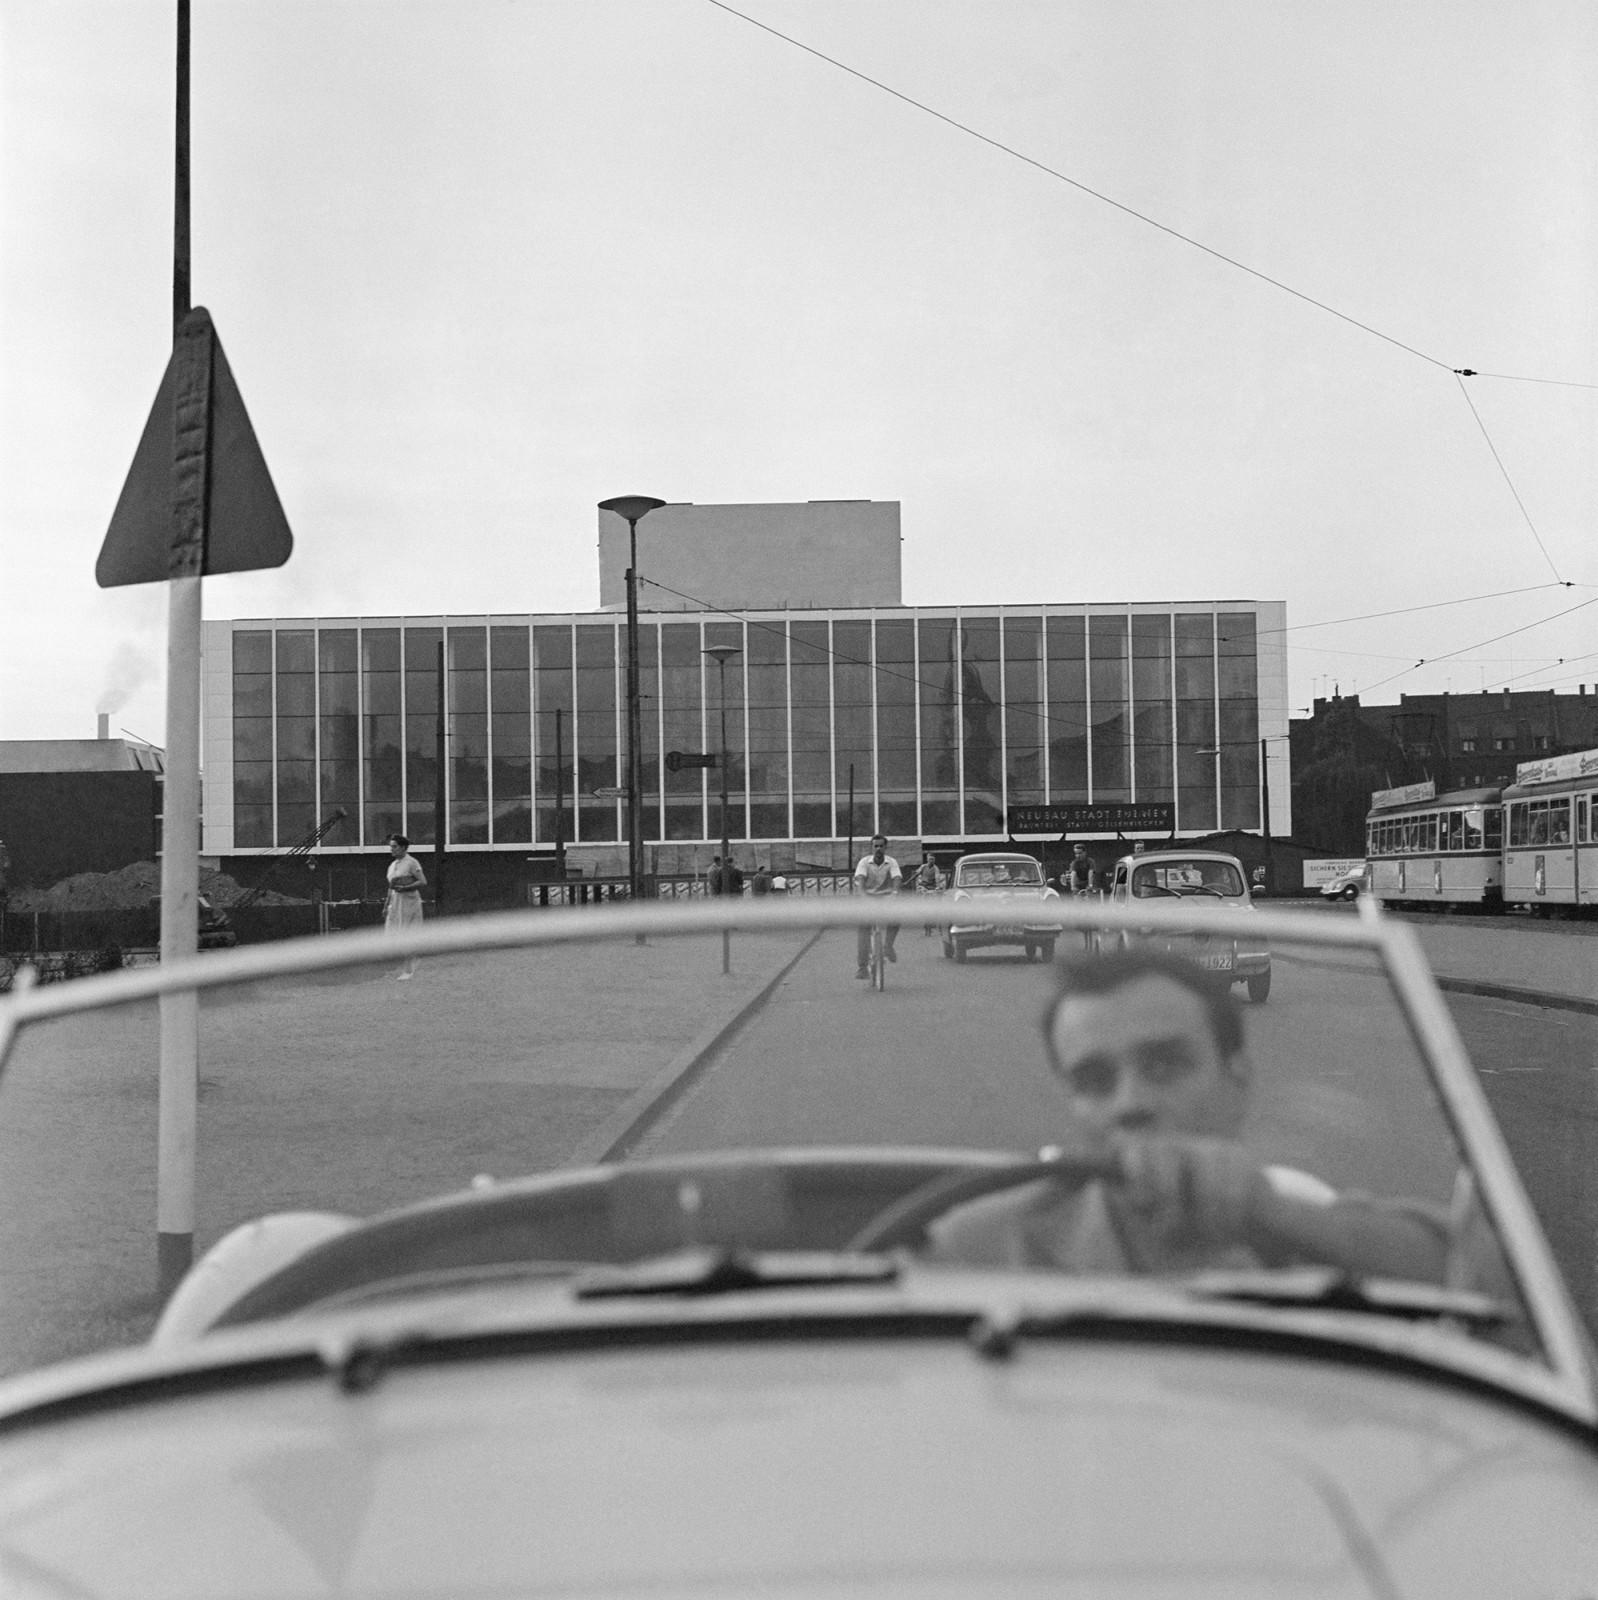 Yves Klein in his car, leaving the site of the Gelsenkirchen Opera Theater